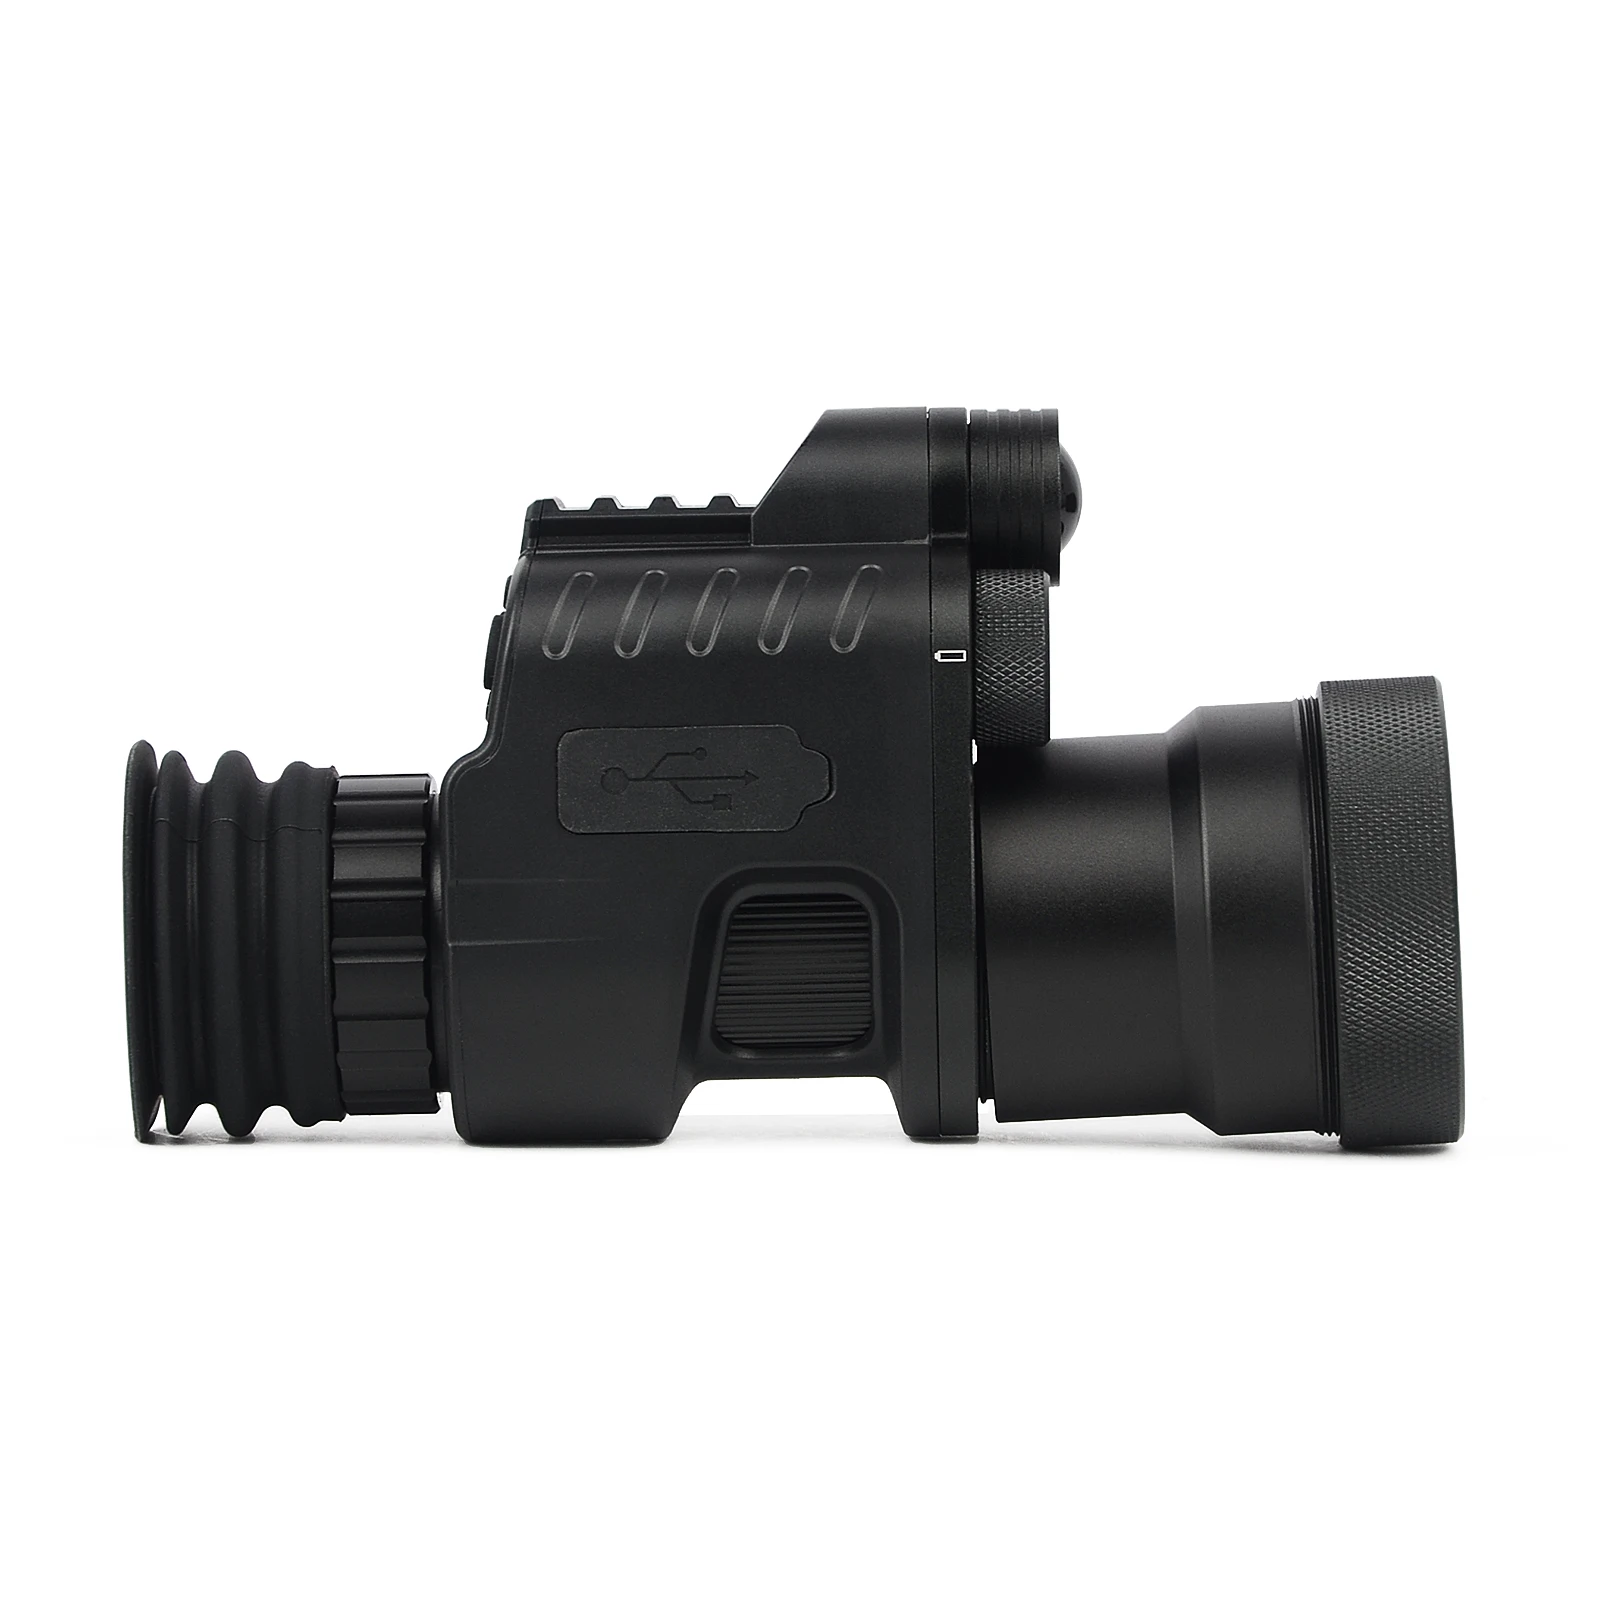 

Wholesale MARCH NV310 Hunting Night Vision Scope Optic Monocular Night Vision With Infrared